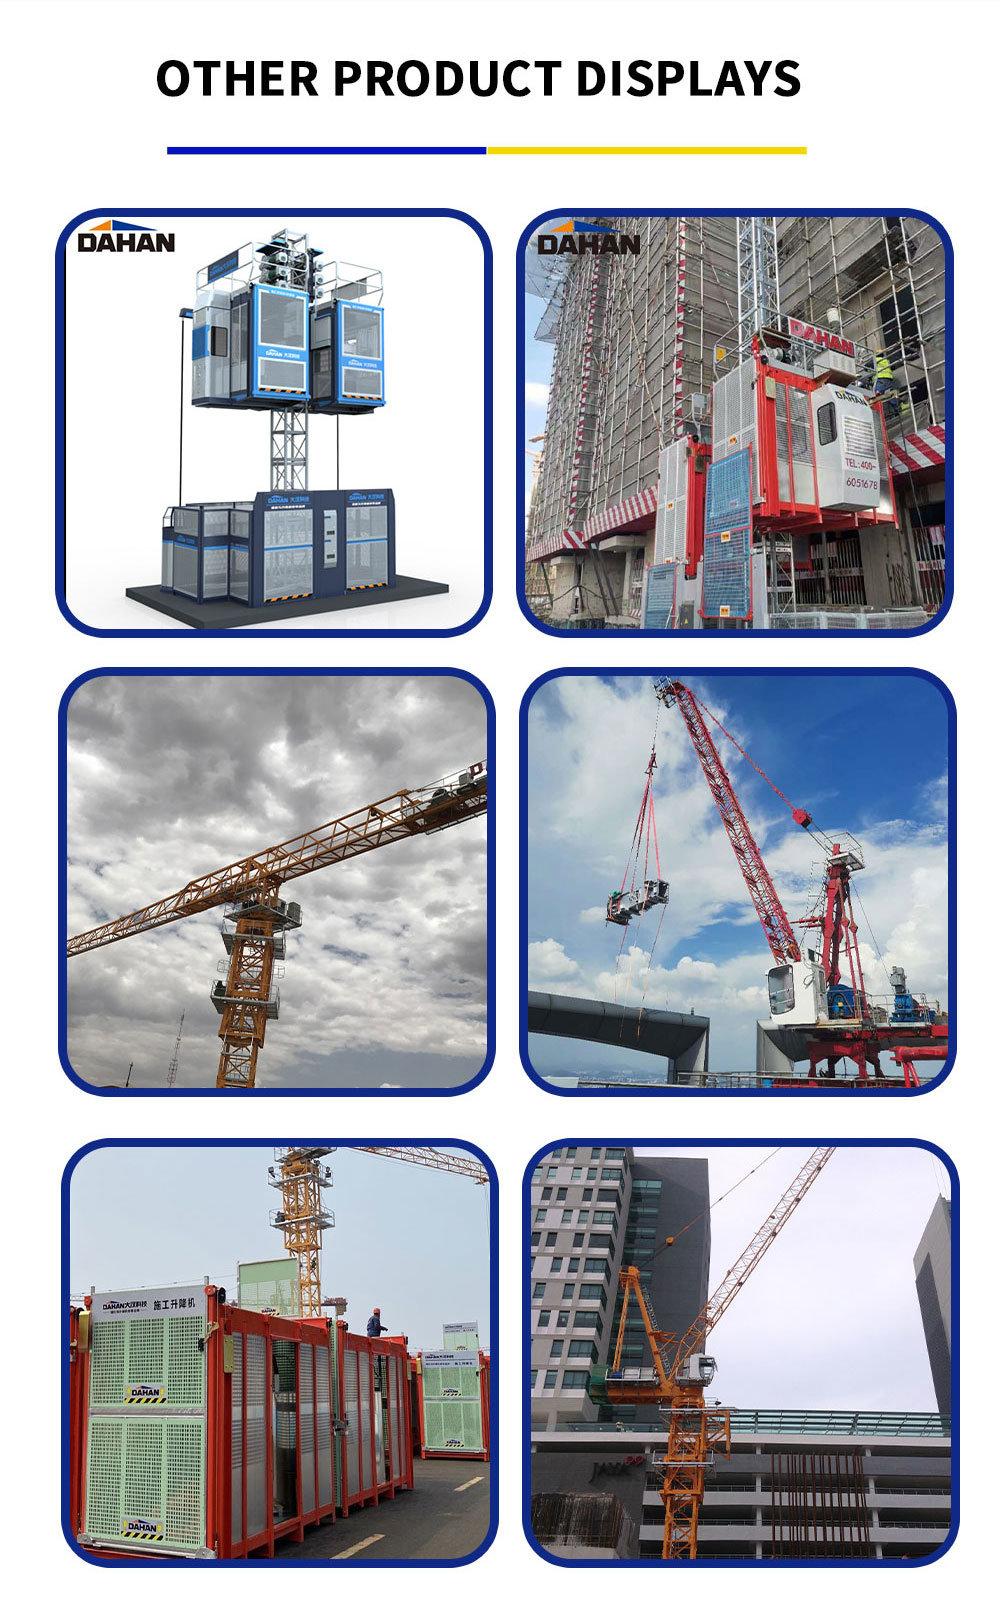 China-Made Building Construction Tower Cap Tower Crane Construction Equipment